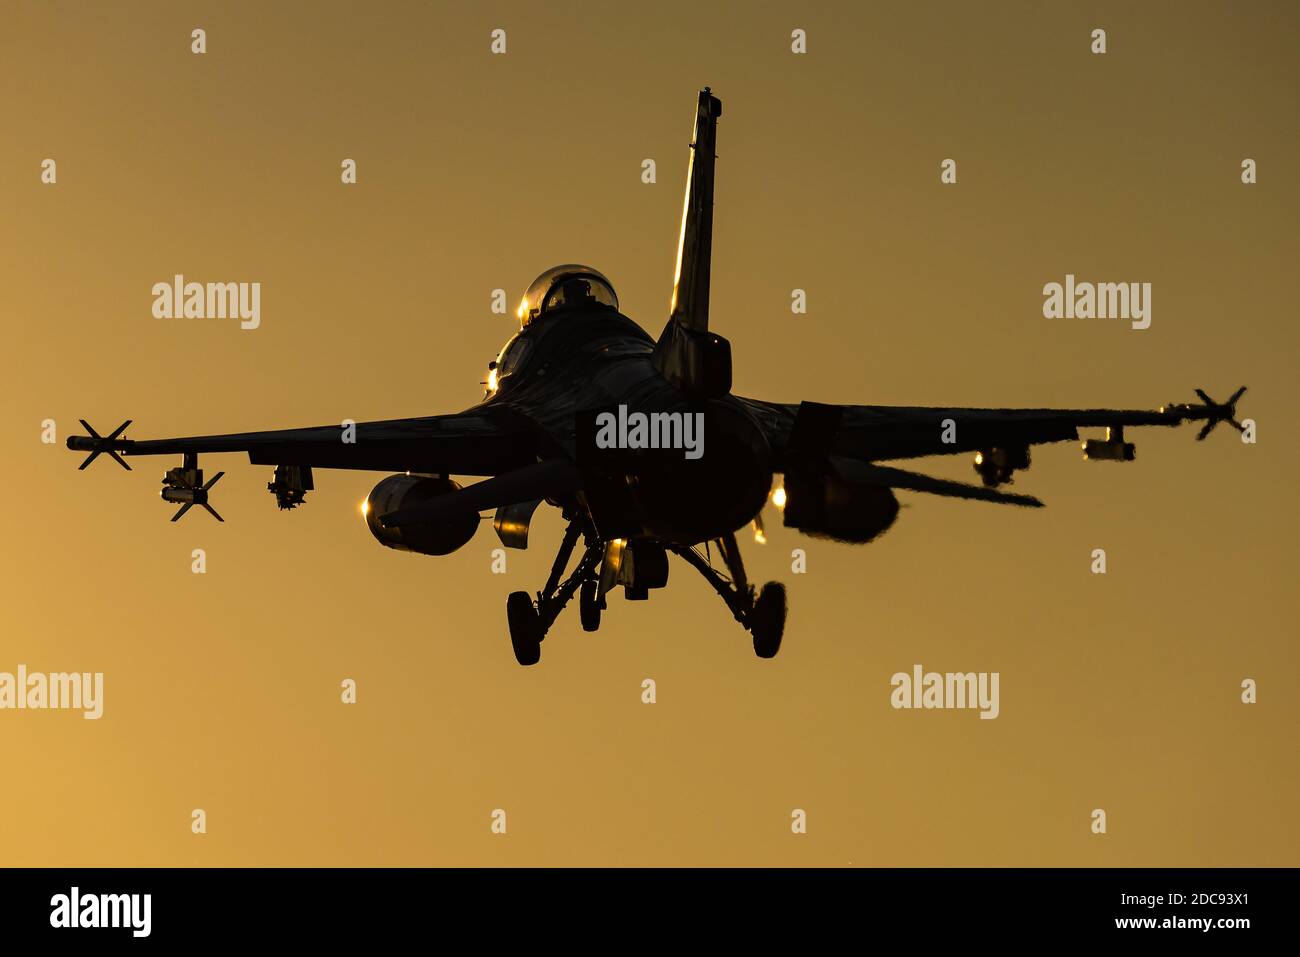 A F-16 Fighting Falcon multirole fighter jet is ready to land at sunset. Stock Photo